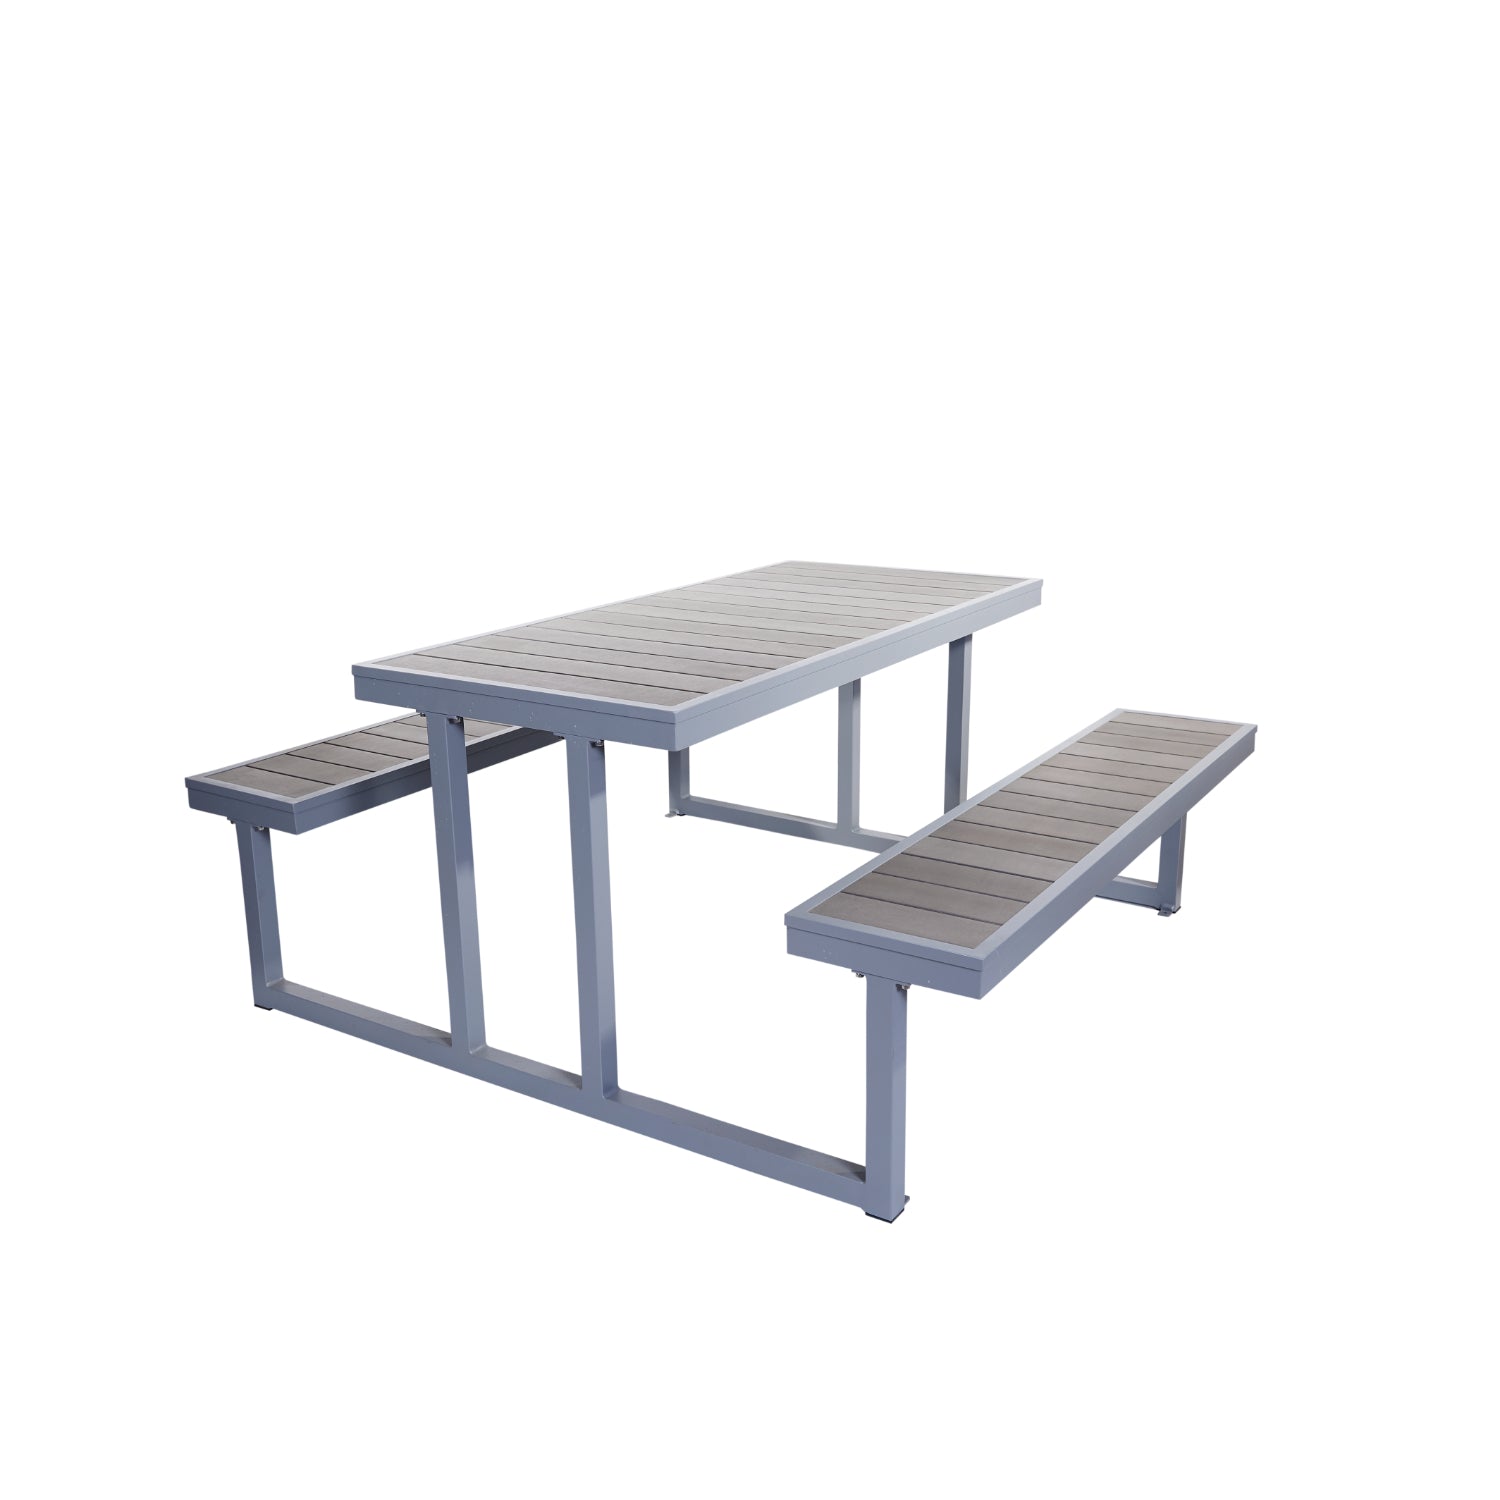 Seaside Collection Outdoor/Indoor 59" x 27.5" Picnic Table, Aluminum Frame with Gray Synthetic Teak Top